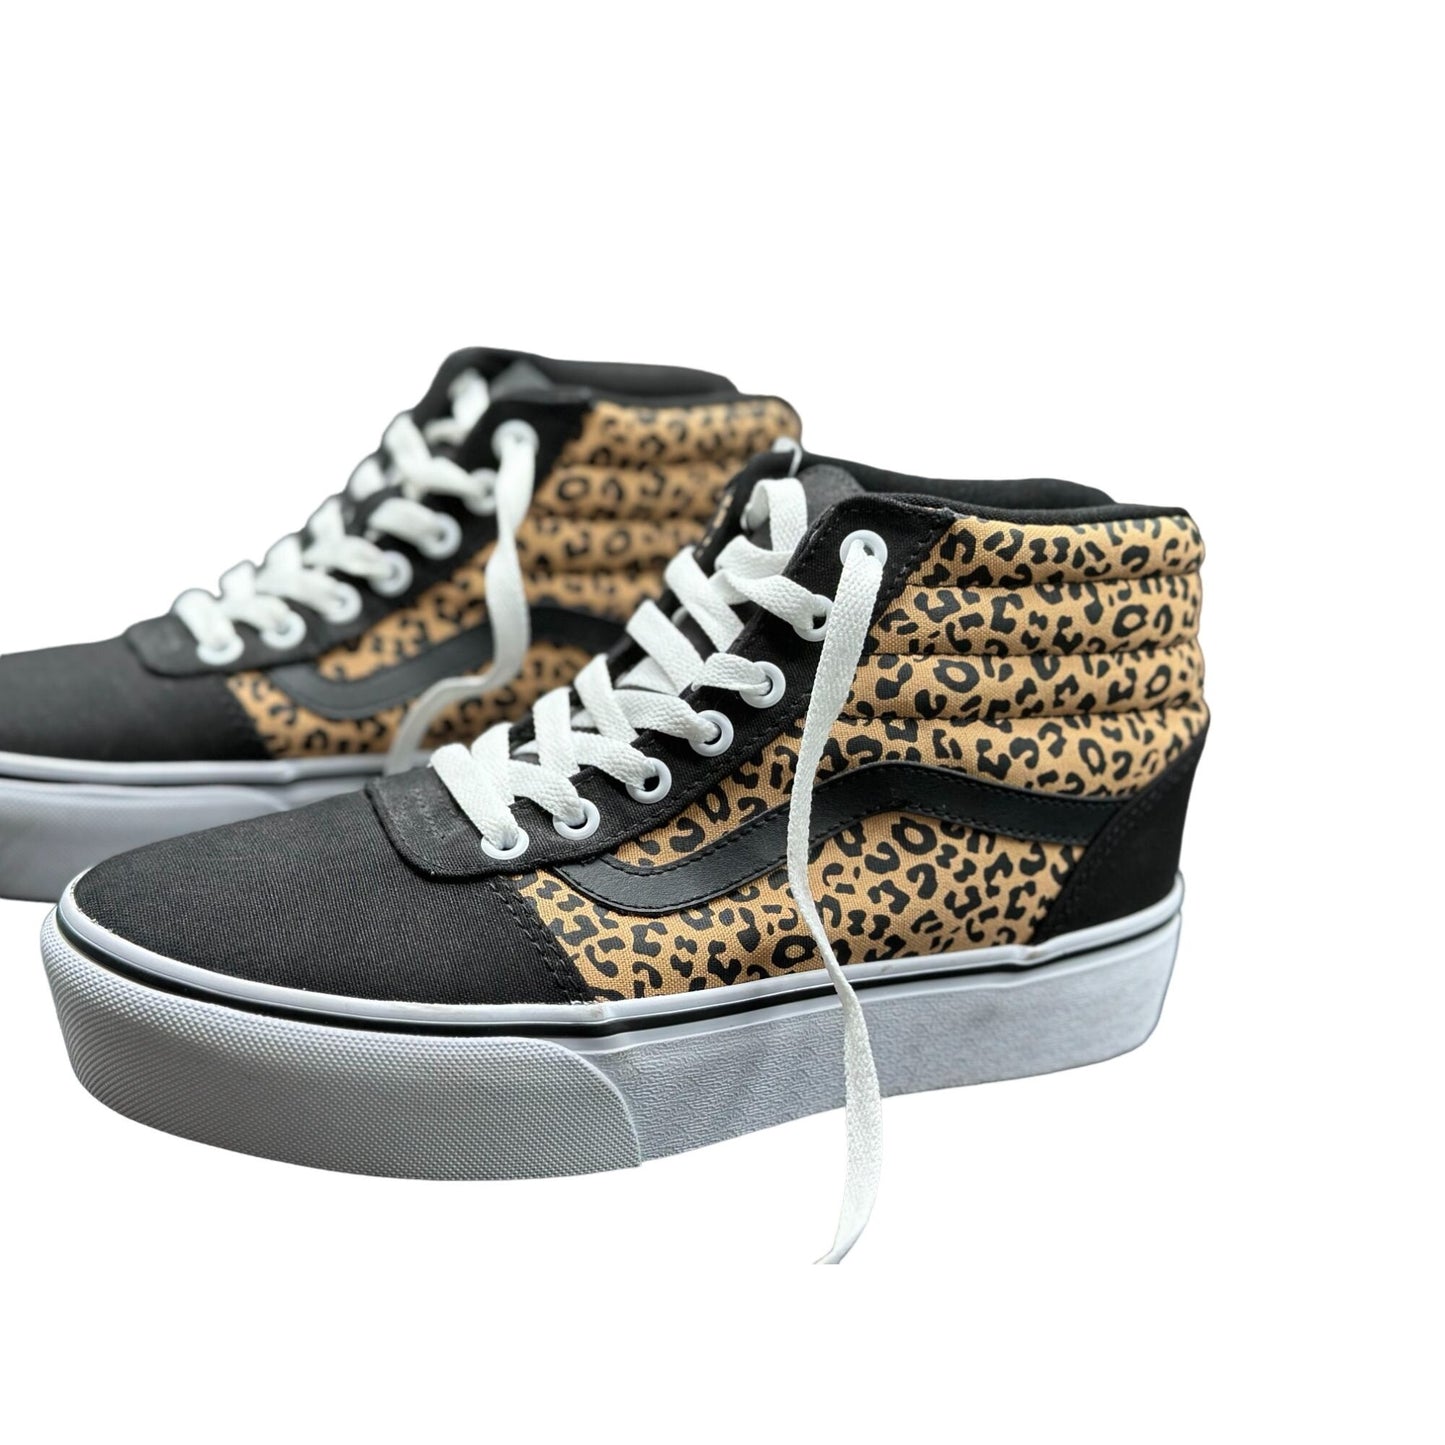 Vans Womens Ward Lace up Canvas High Top Sneakers Shoes Animal Print Size 8.5